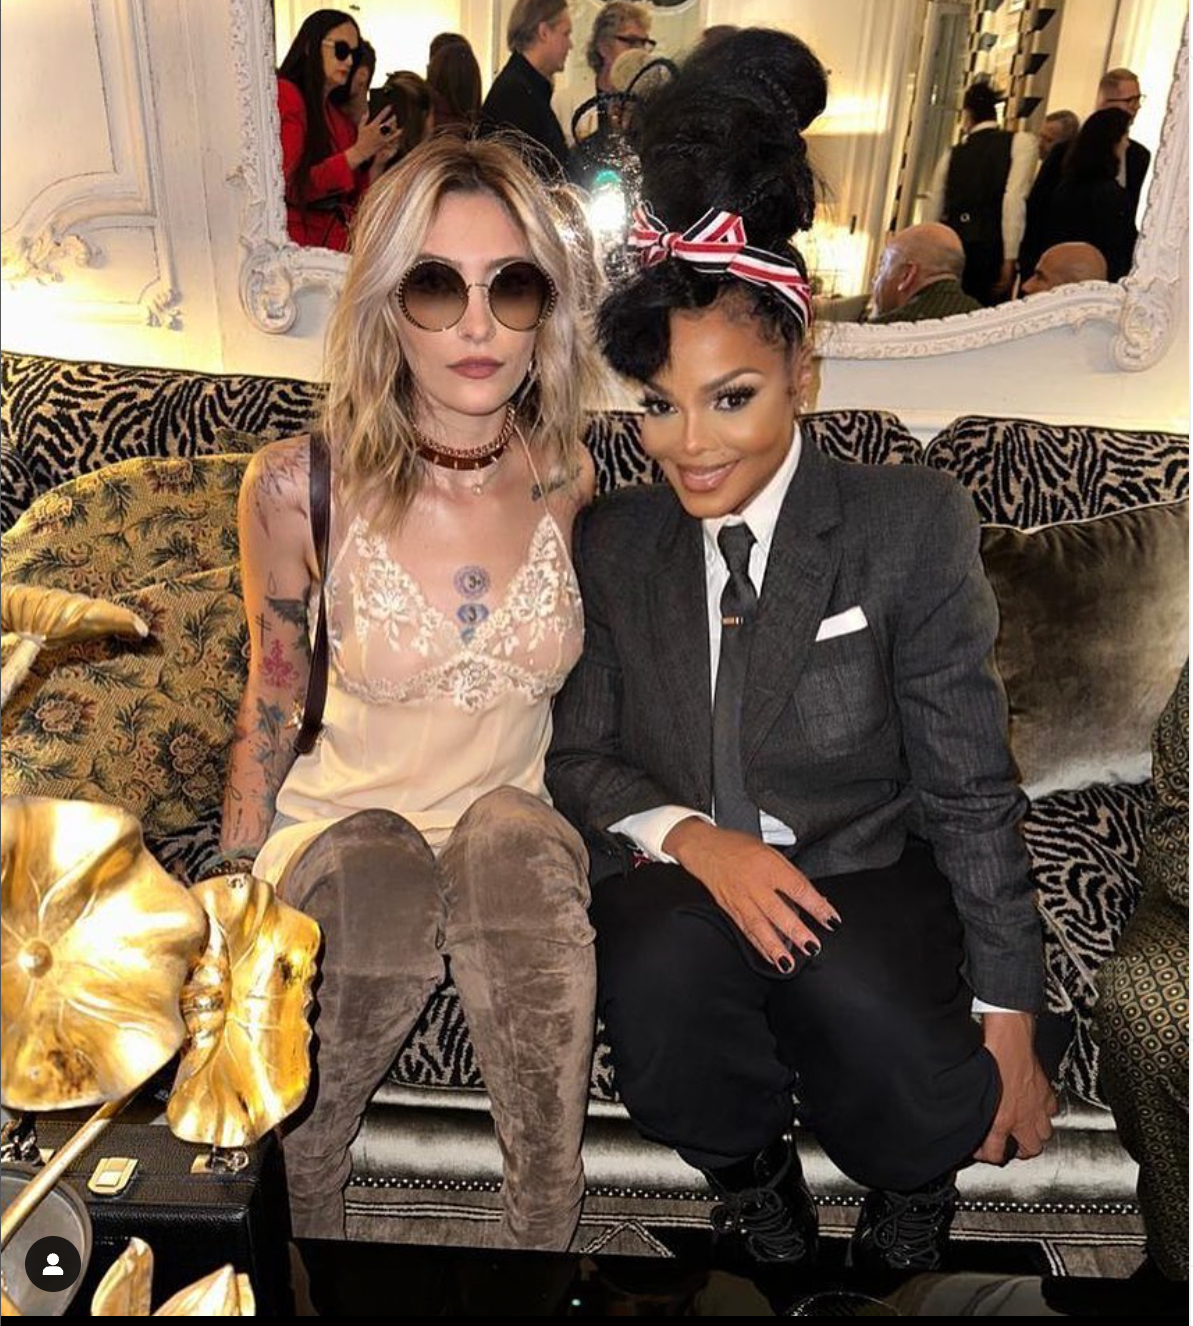 Janet Jackson Hasn't Aged A Day In New IG Post With Niece Paris Jackson